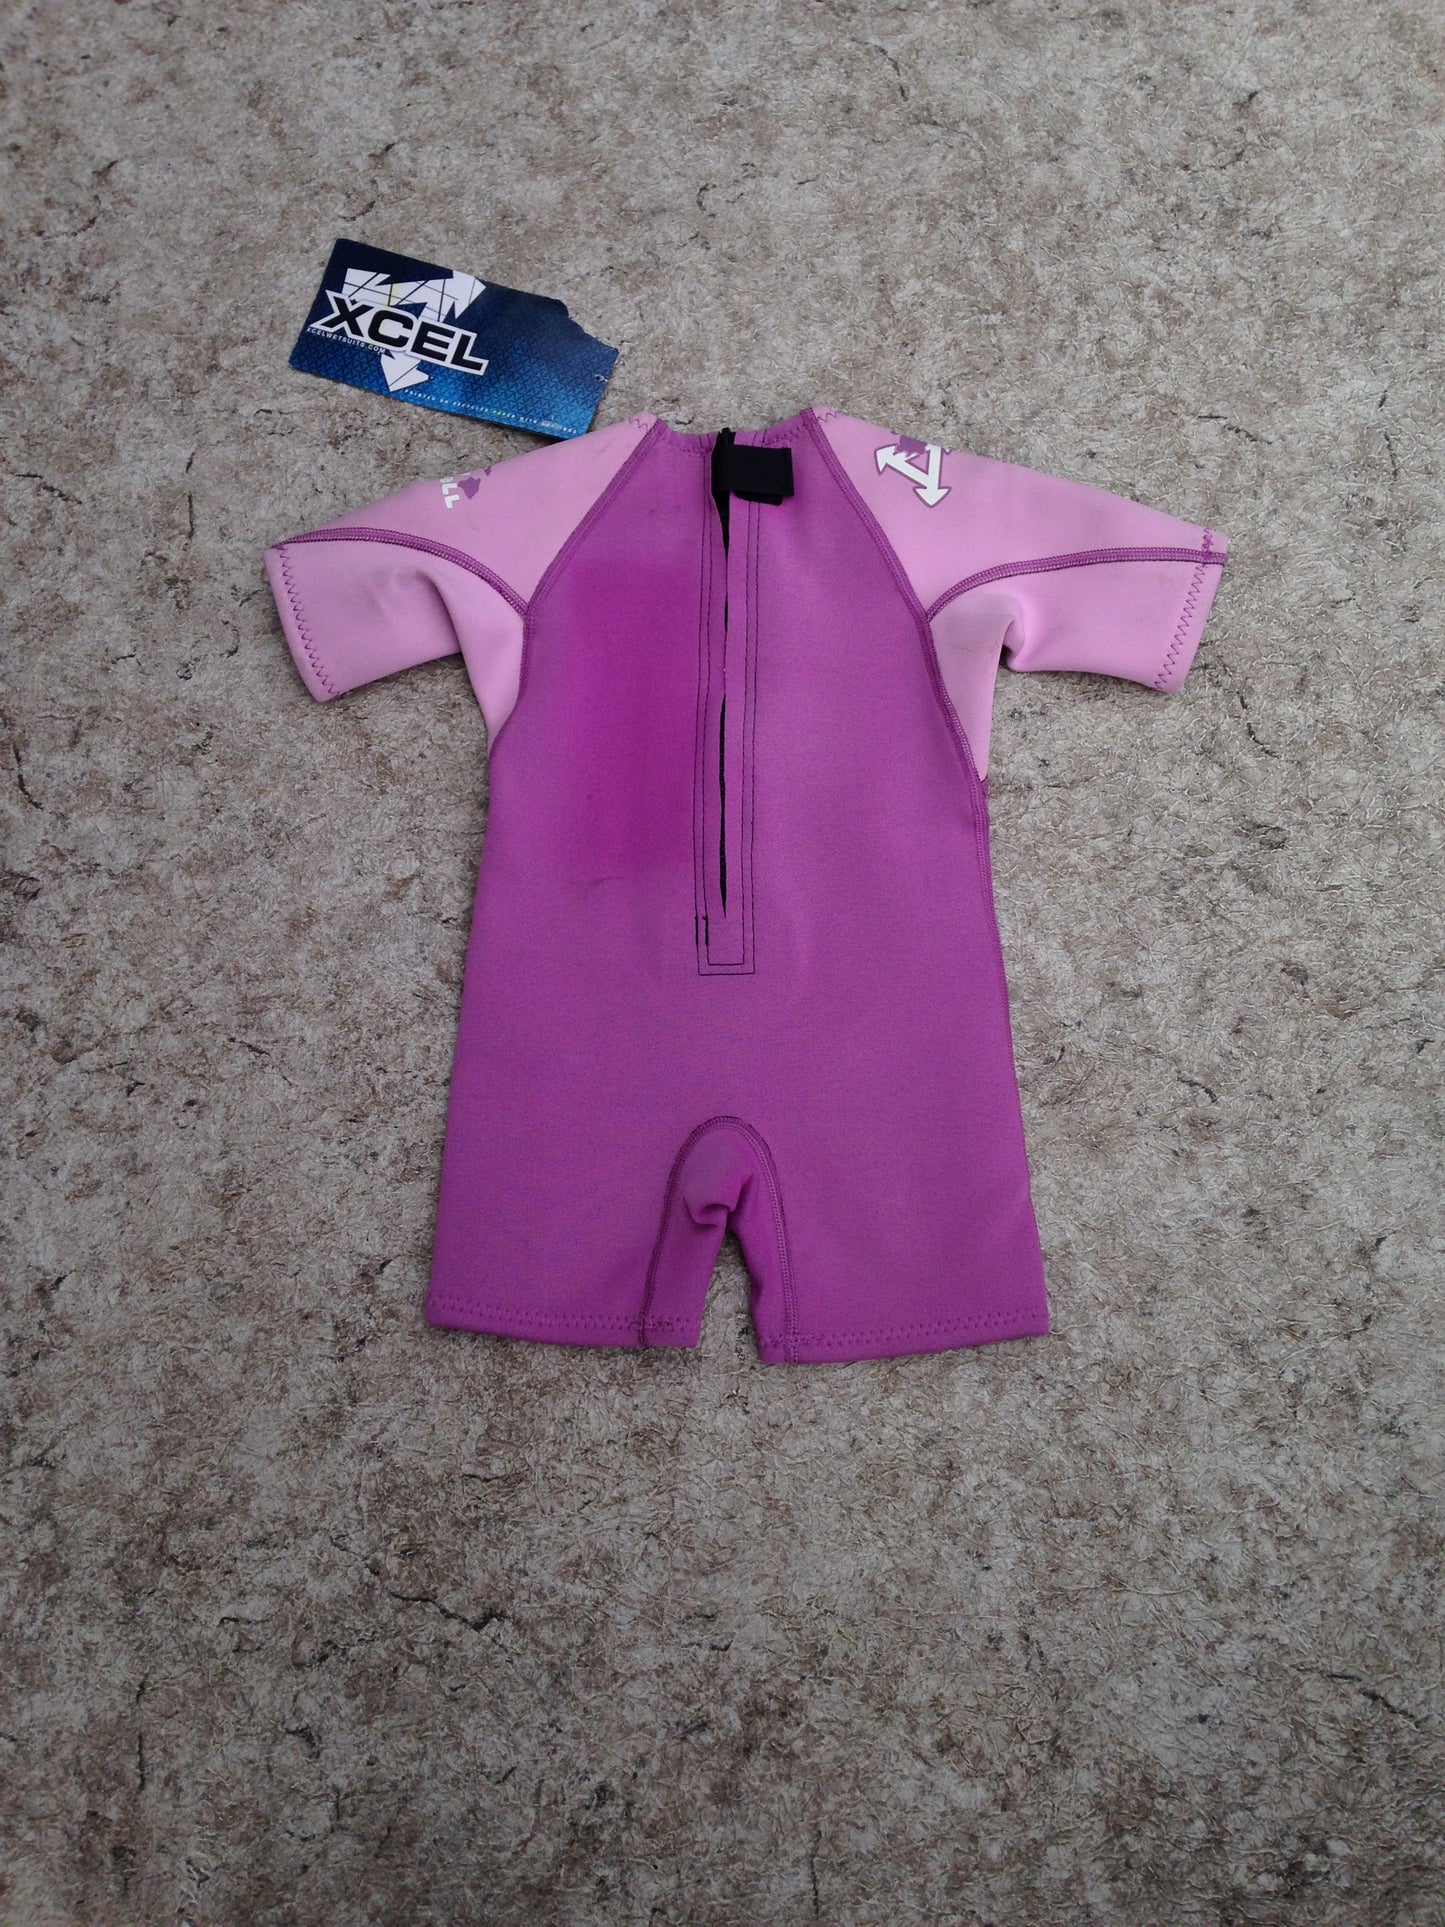 Wetuit Child Size 12-18 month Xcel Pink New With Tags  2 mm Neoprene